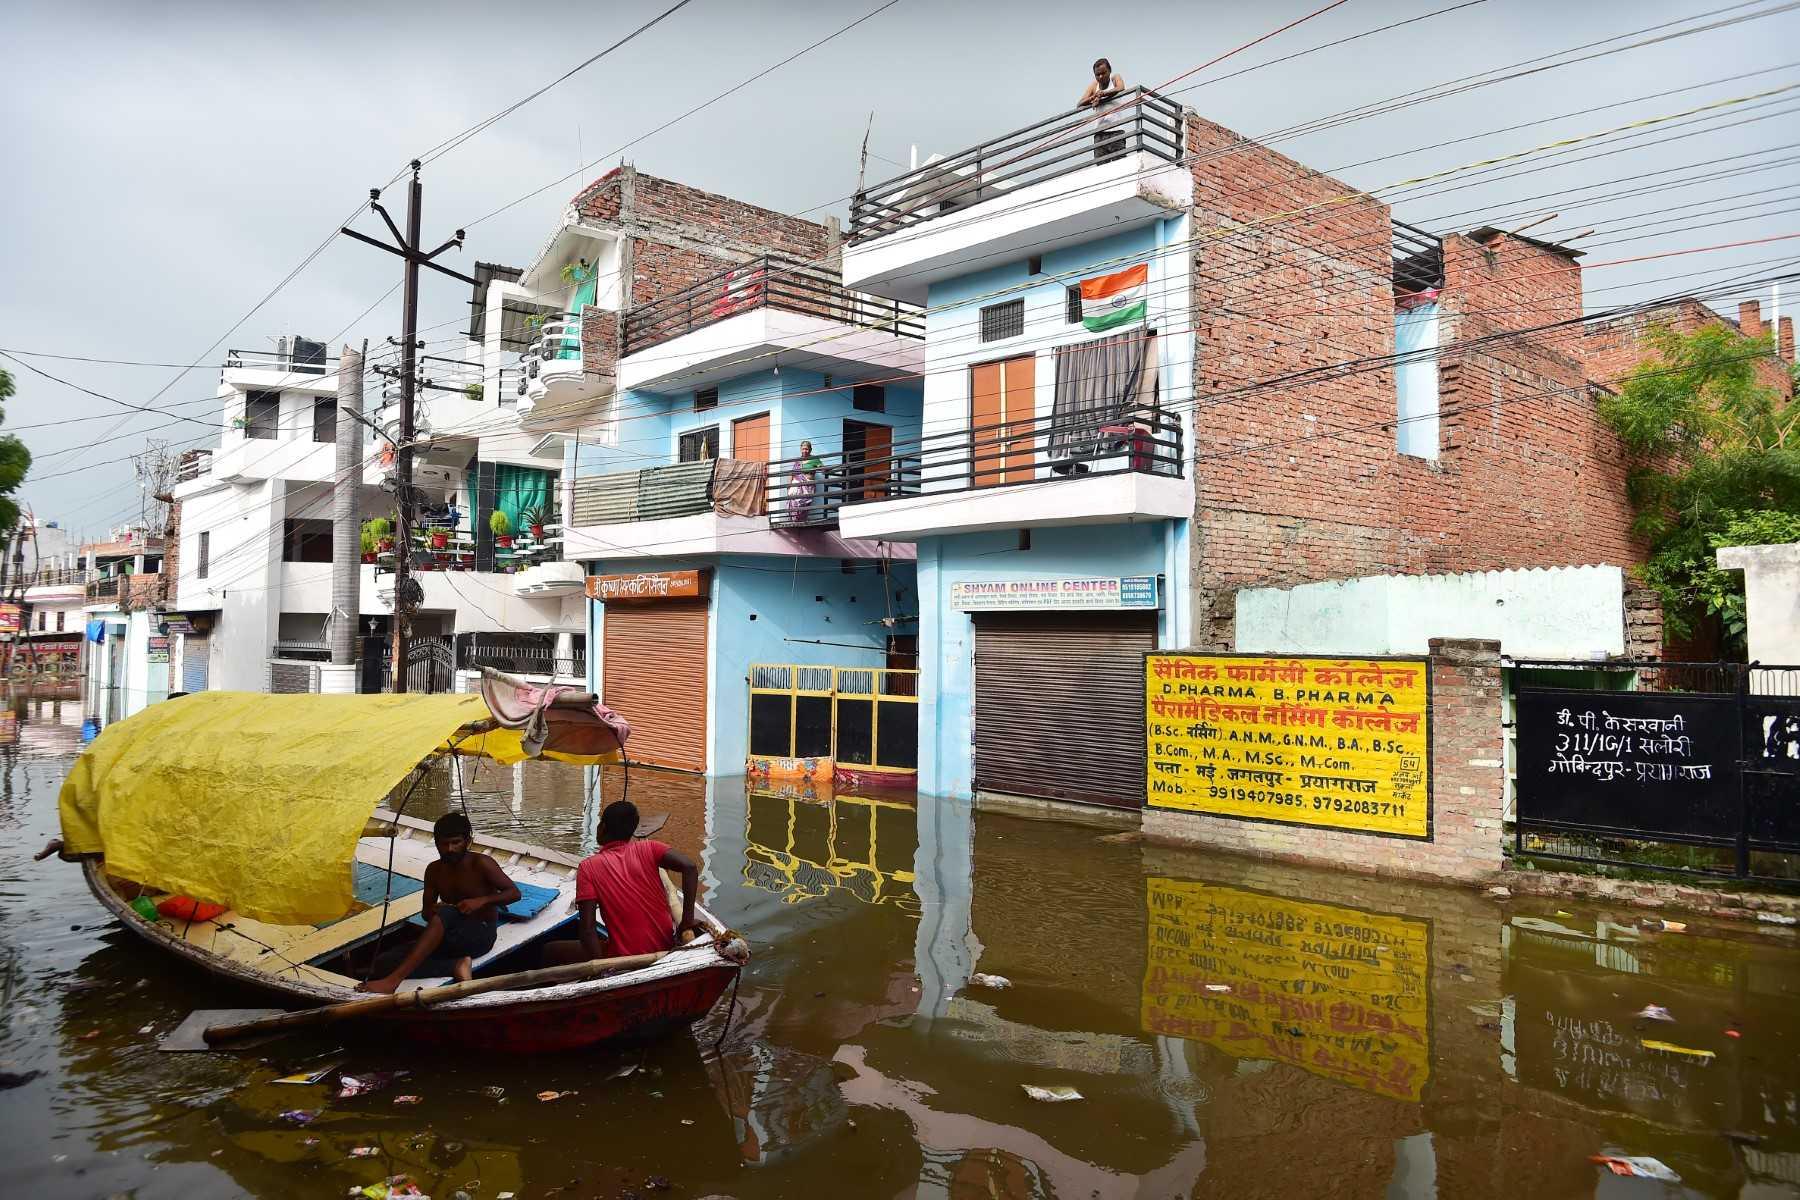 Residents look out from their home in a flooded residential area in Allahabad on Aug 26, following heavy monsoon rains that caused the overflowing of the Ganges and Yamuna Rivers. Photo: AFP 